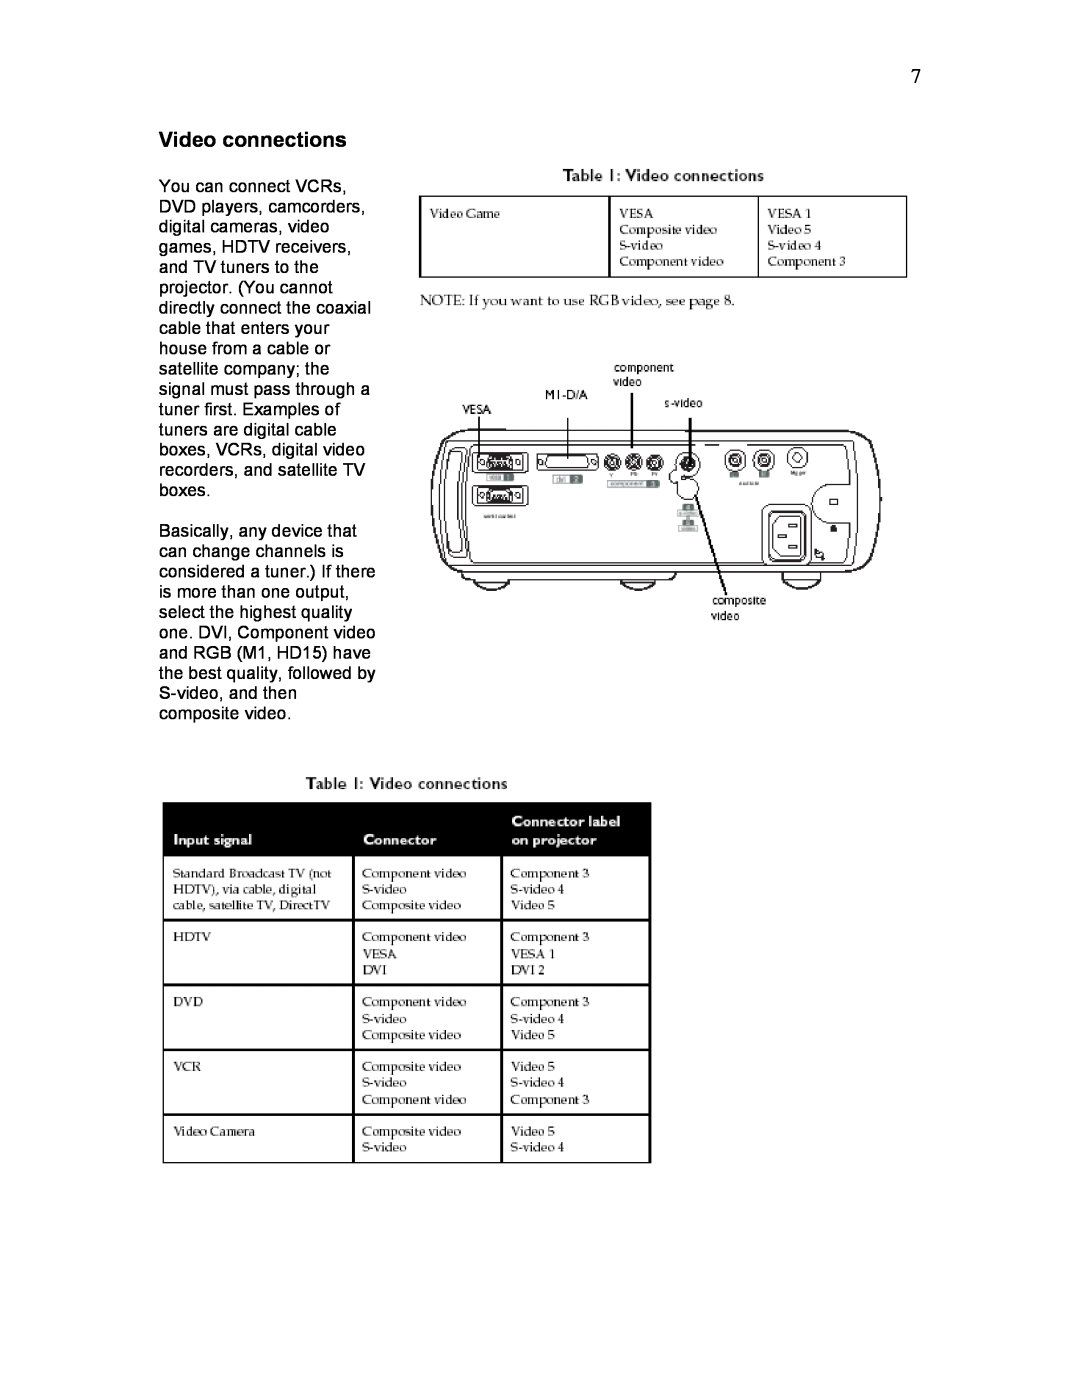 Knoll Systems HD225 user manual Video connections 